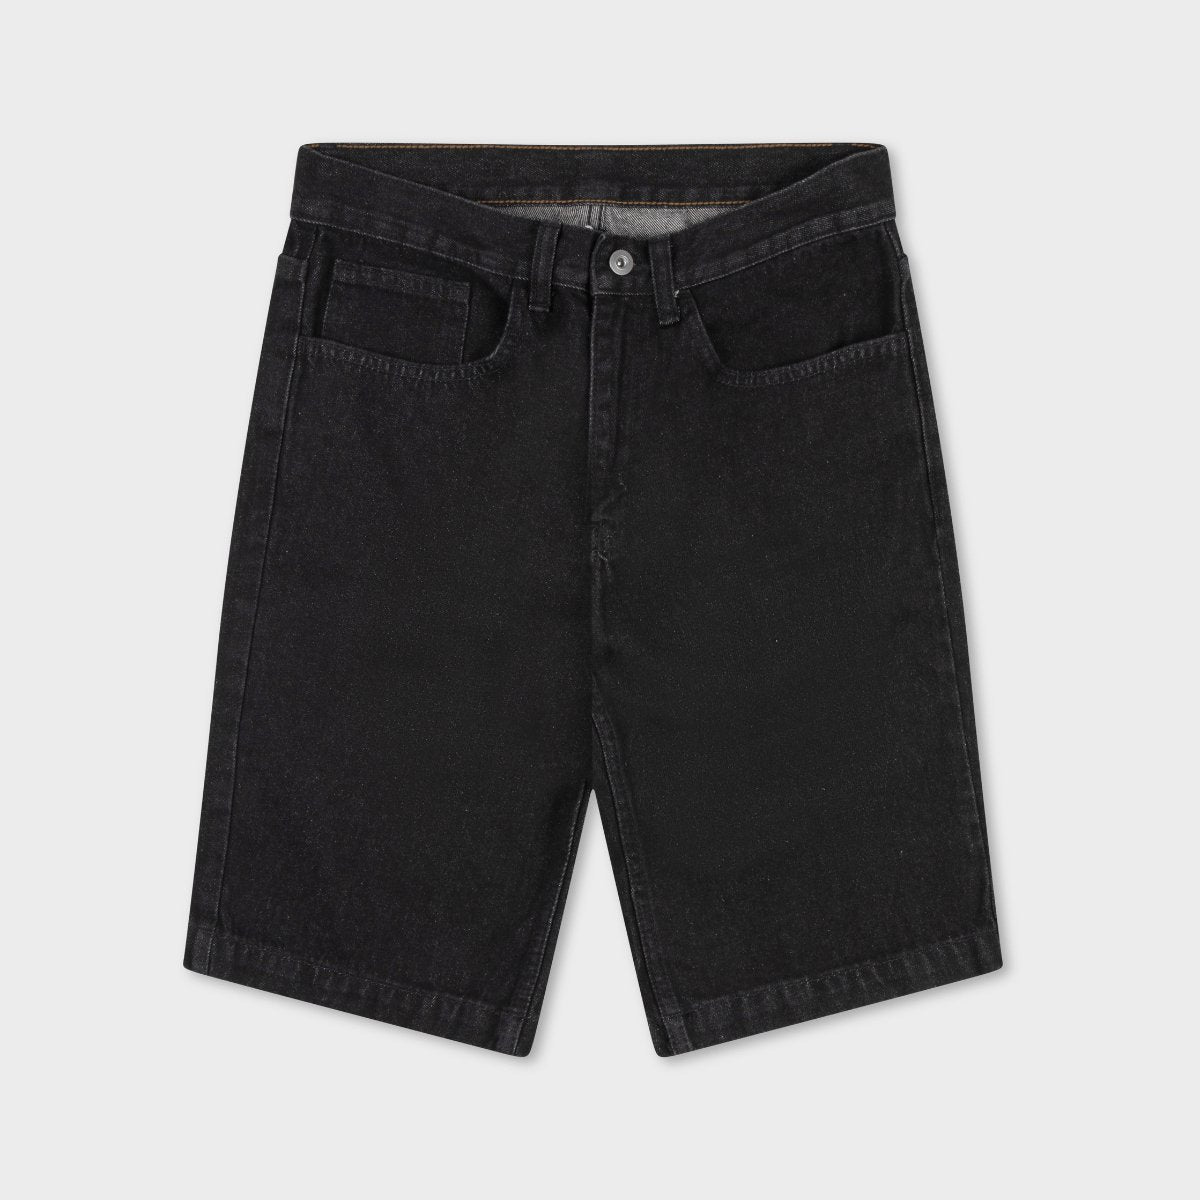 Ex store Men's G Pocket Denim Shorts | Shorts – You Know Who's